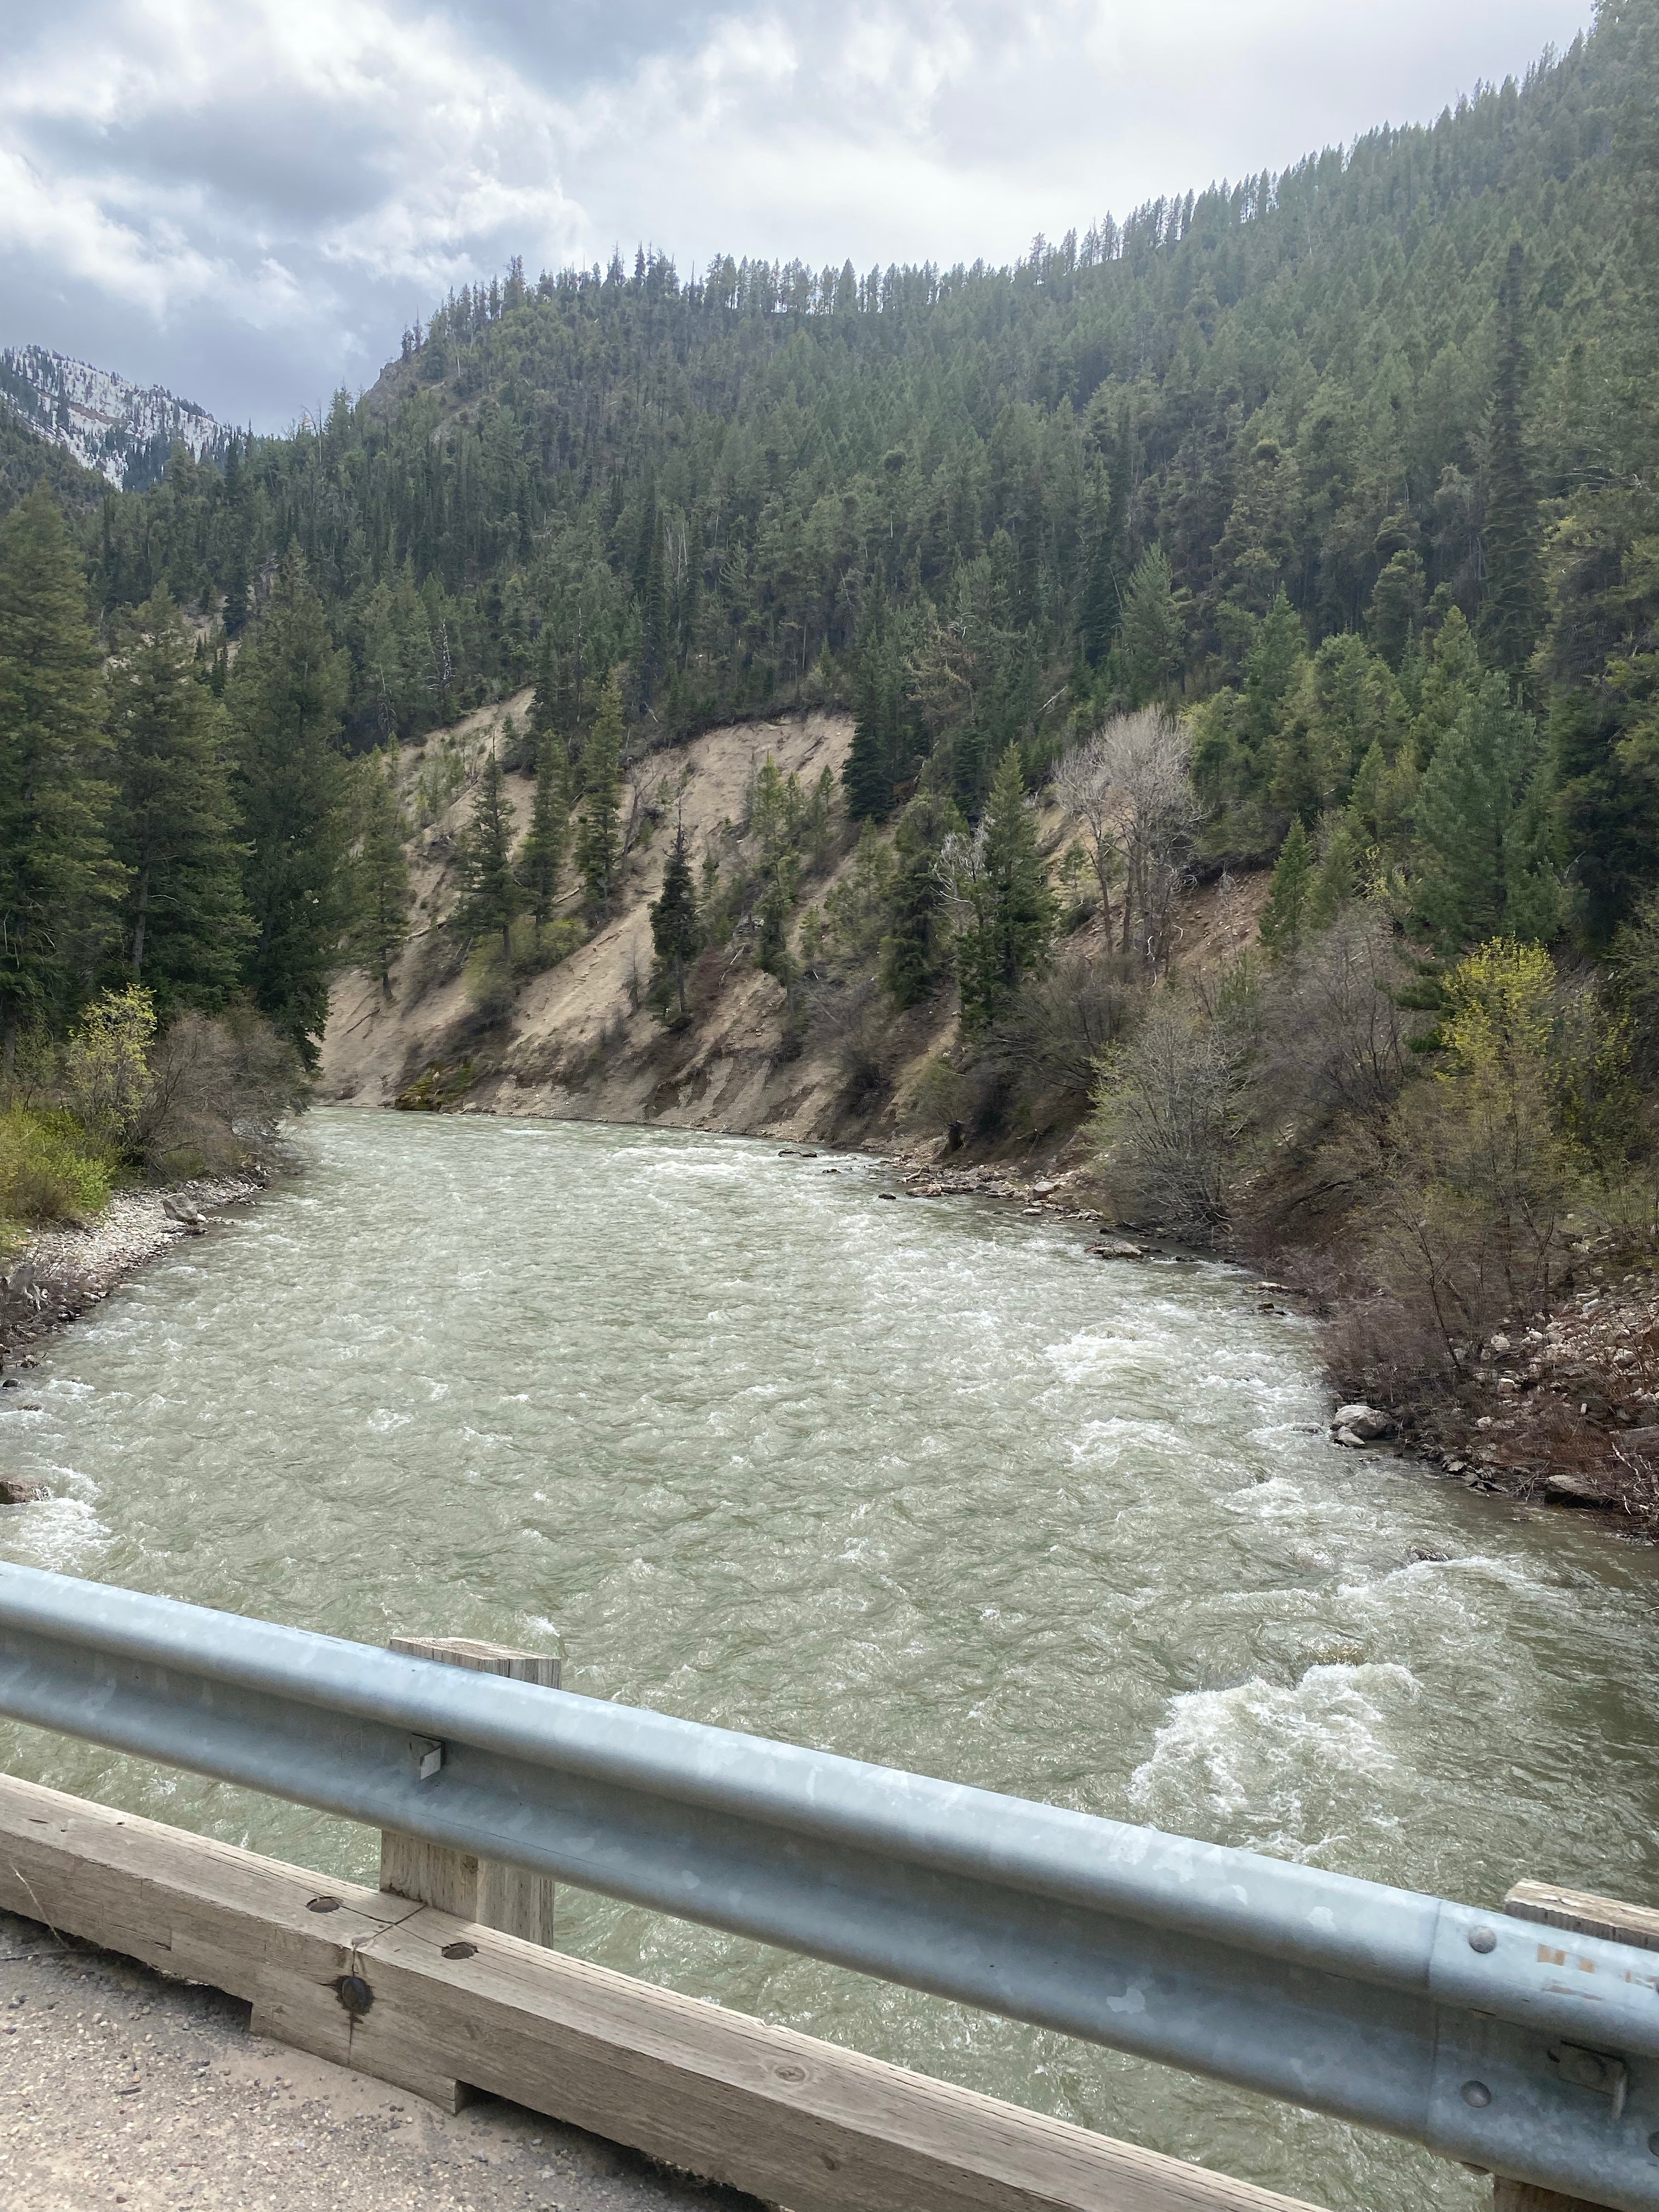 Camper submitted image from Greys River Corridor - 4